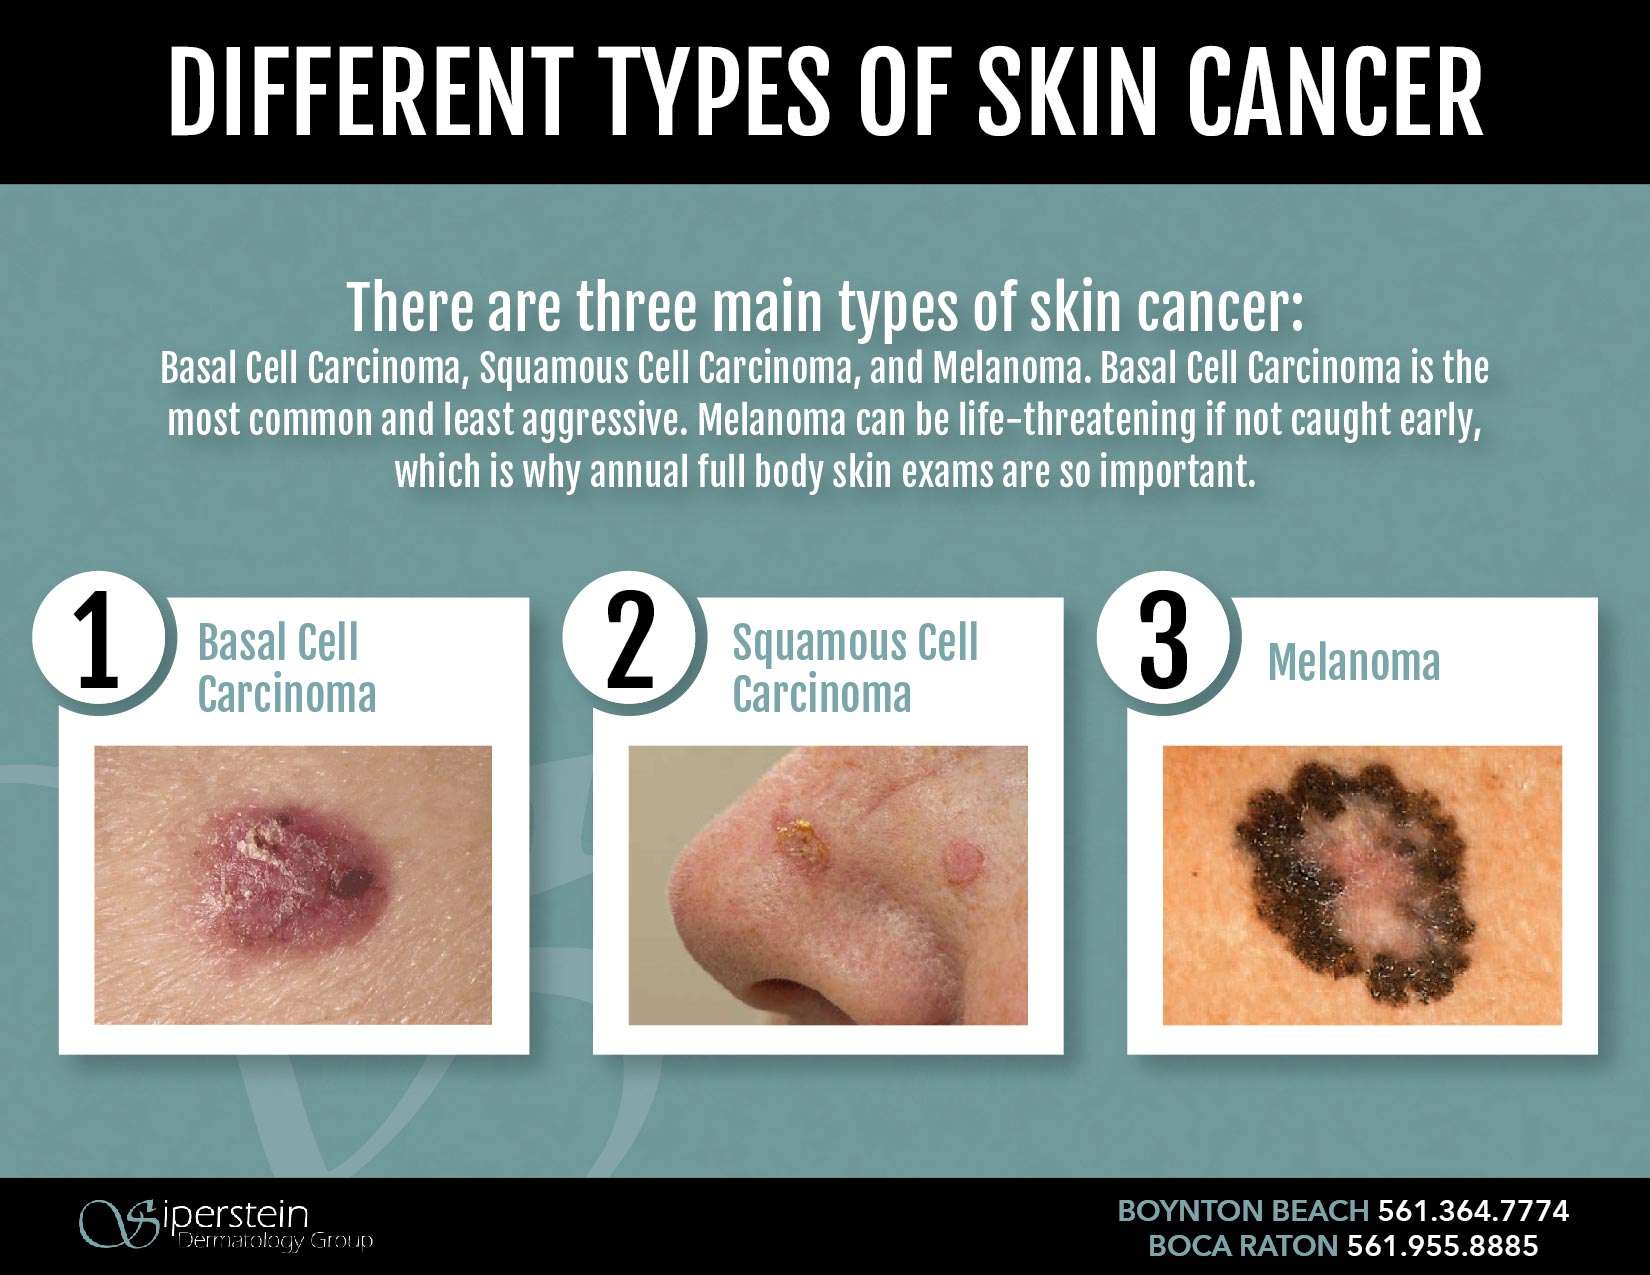 Why And How Skin Cancer Screening Can Save Your Life